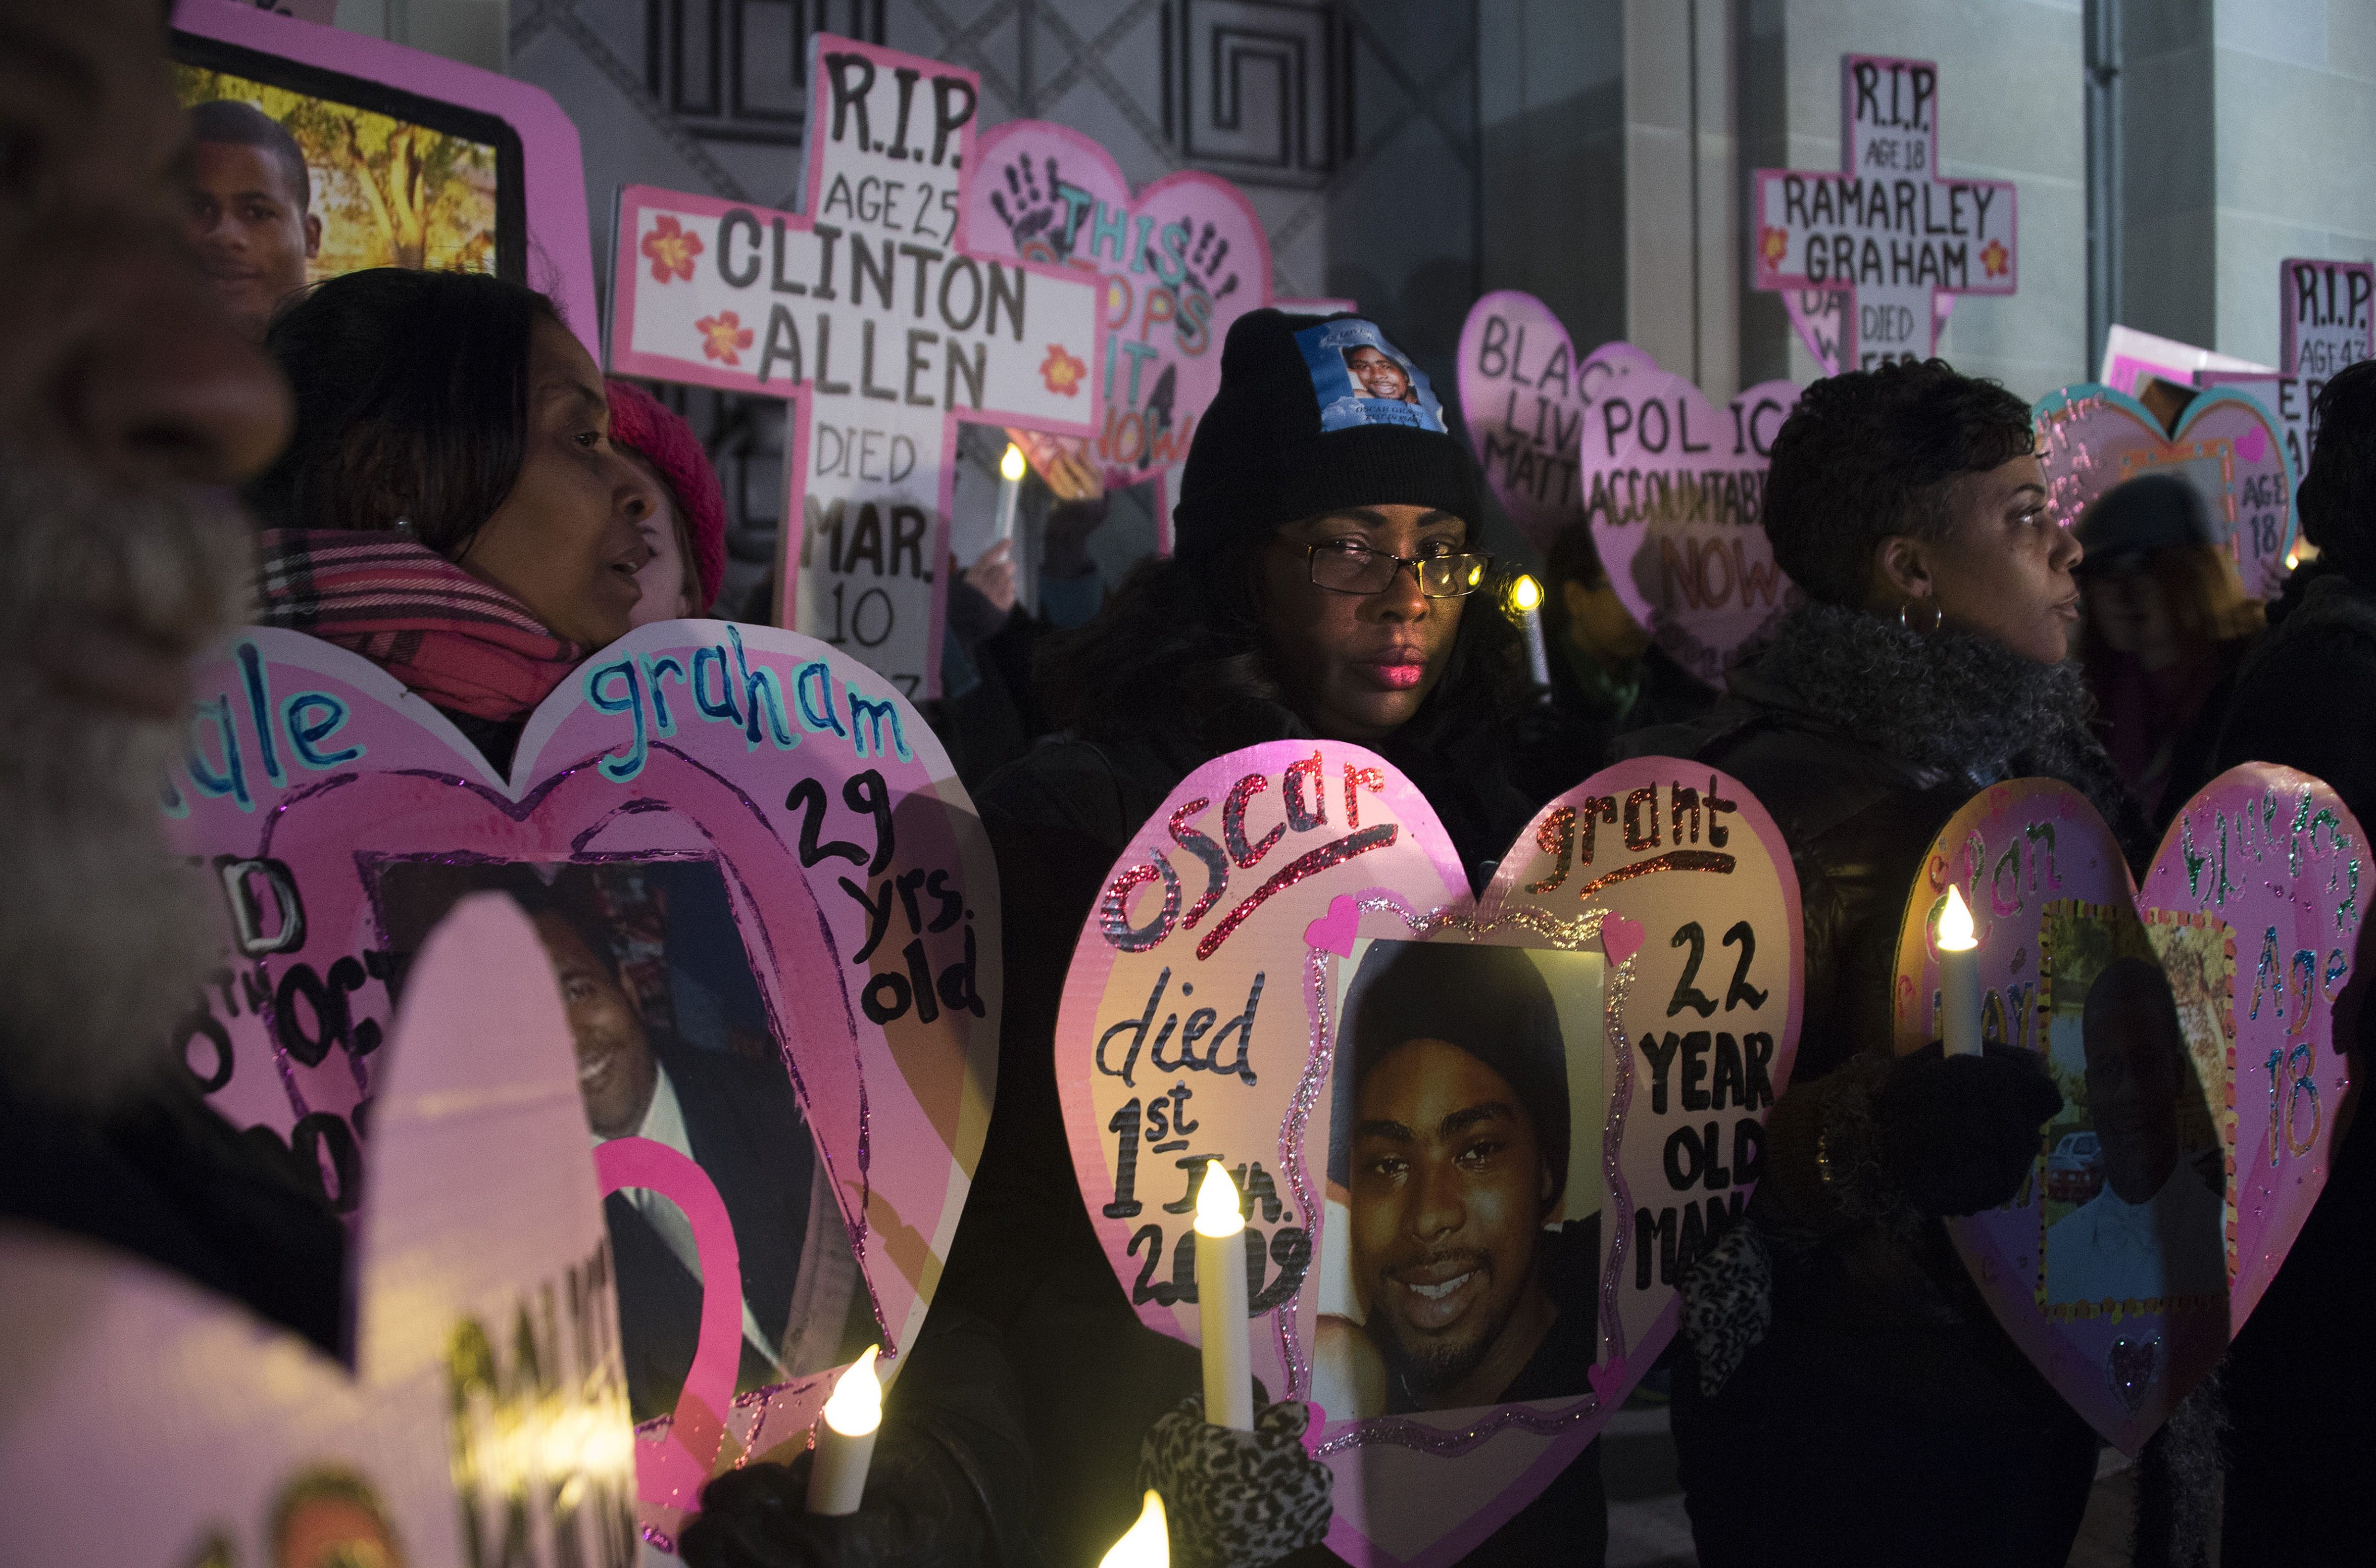 Wanda Johnson (center), whose son Oscar Grant was fatally shot in 2009 by a police officer in Oakland, California, stands with others during a vigil in Washington, D.C., on Dec. 10, 2014. (Jim Watson/AFP—Getty Images)